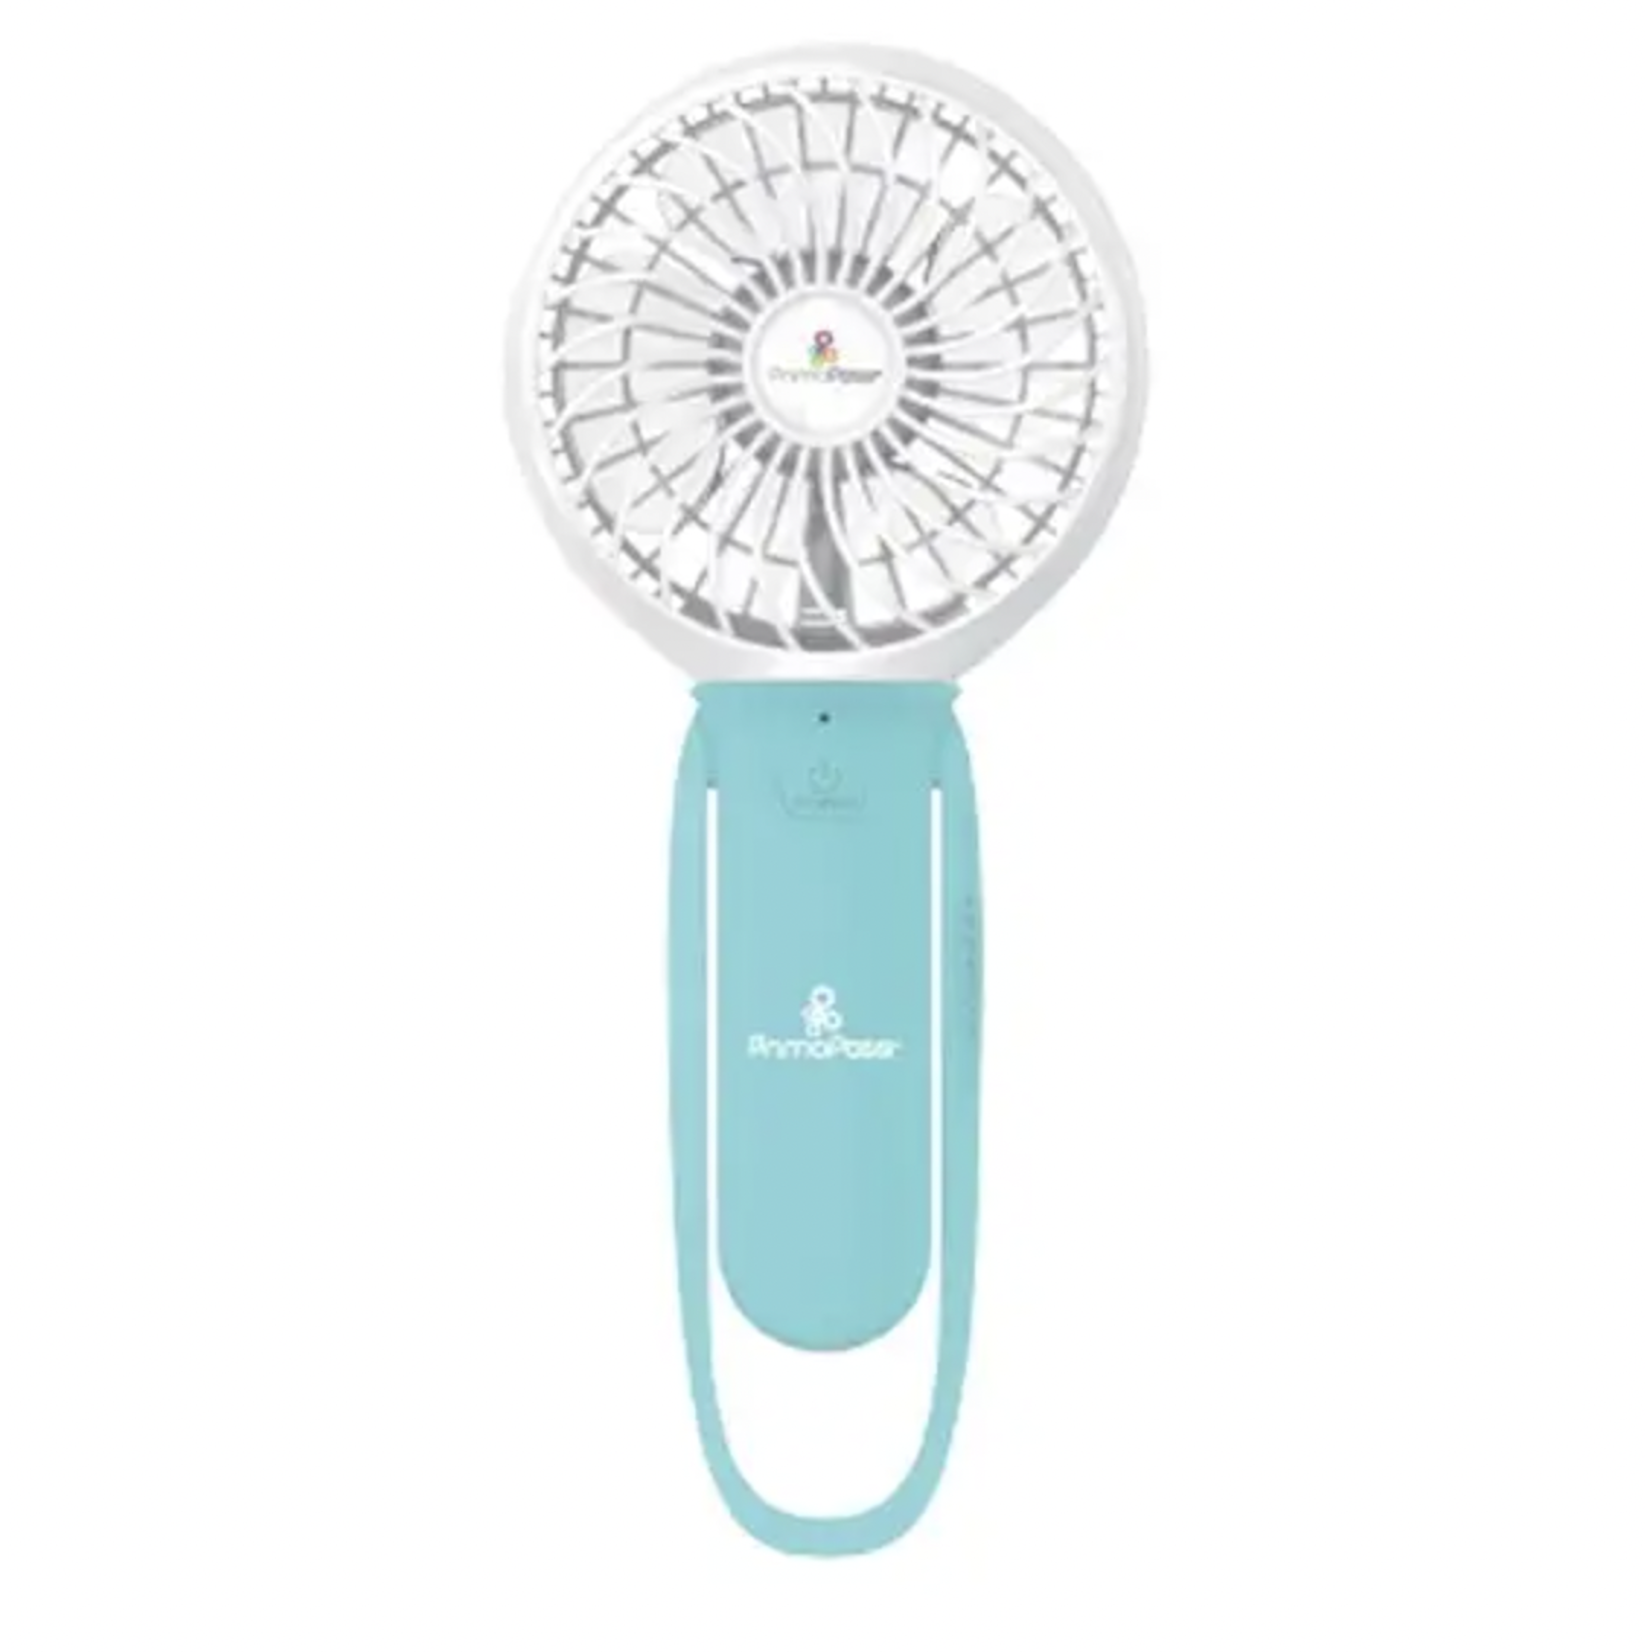 Primo Passi 3 in 1 Rechargeable Turbo Fan - Light Blue